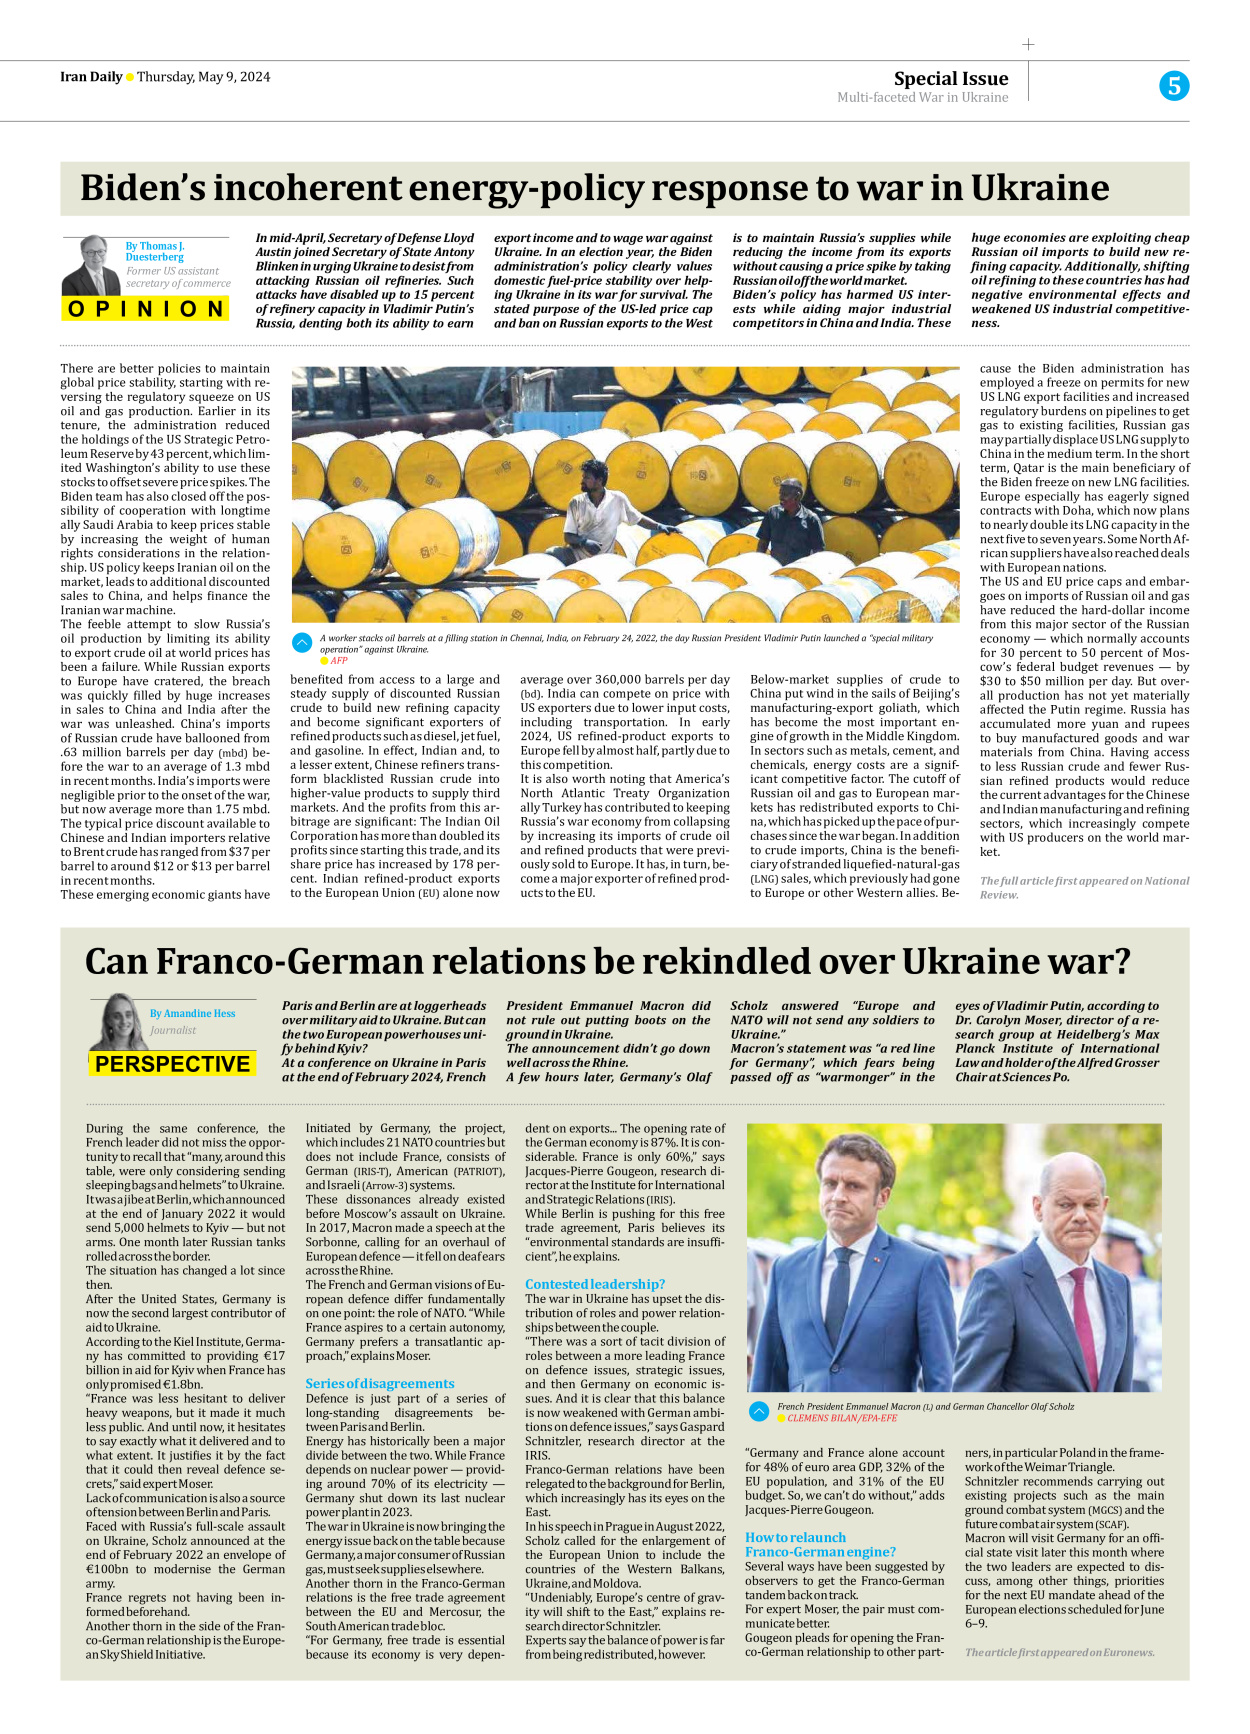 Iran Daily - Number Seven Thousand Five Hundred and Fifty Three - 09 May 2024 - Page 5